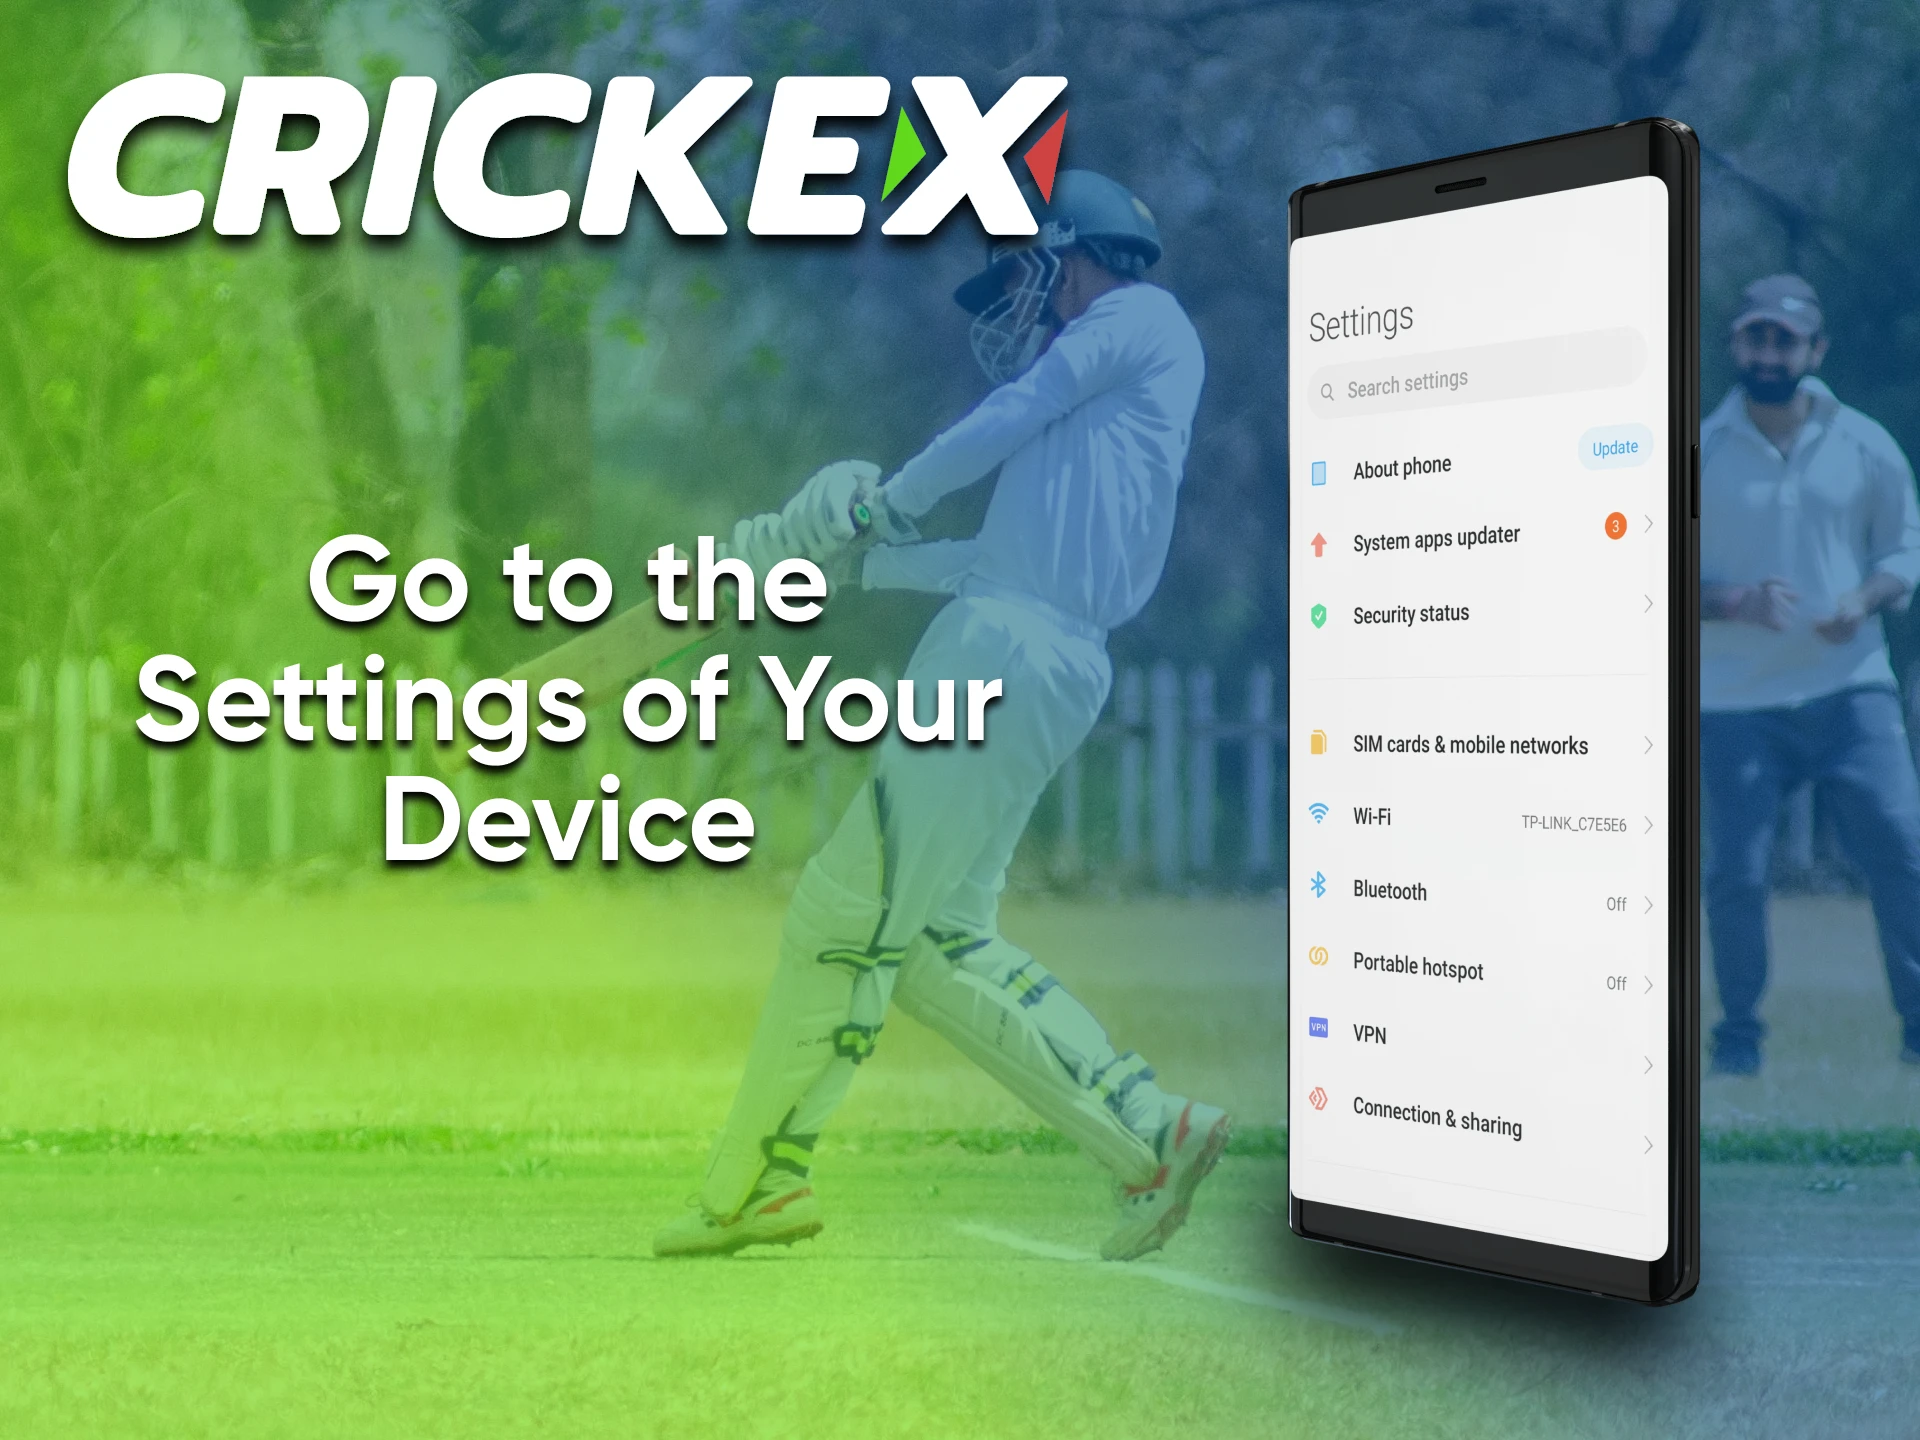 You need to use your phone settings to install the Crickex app.